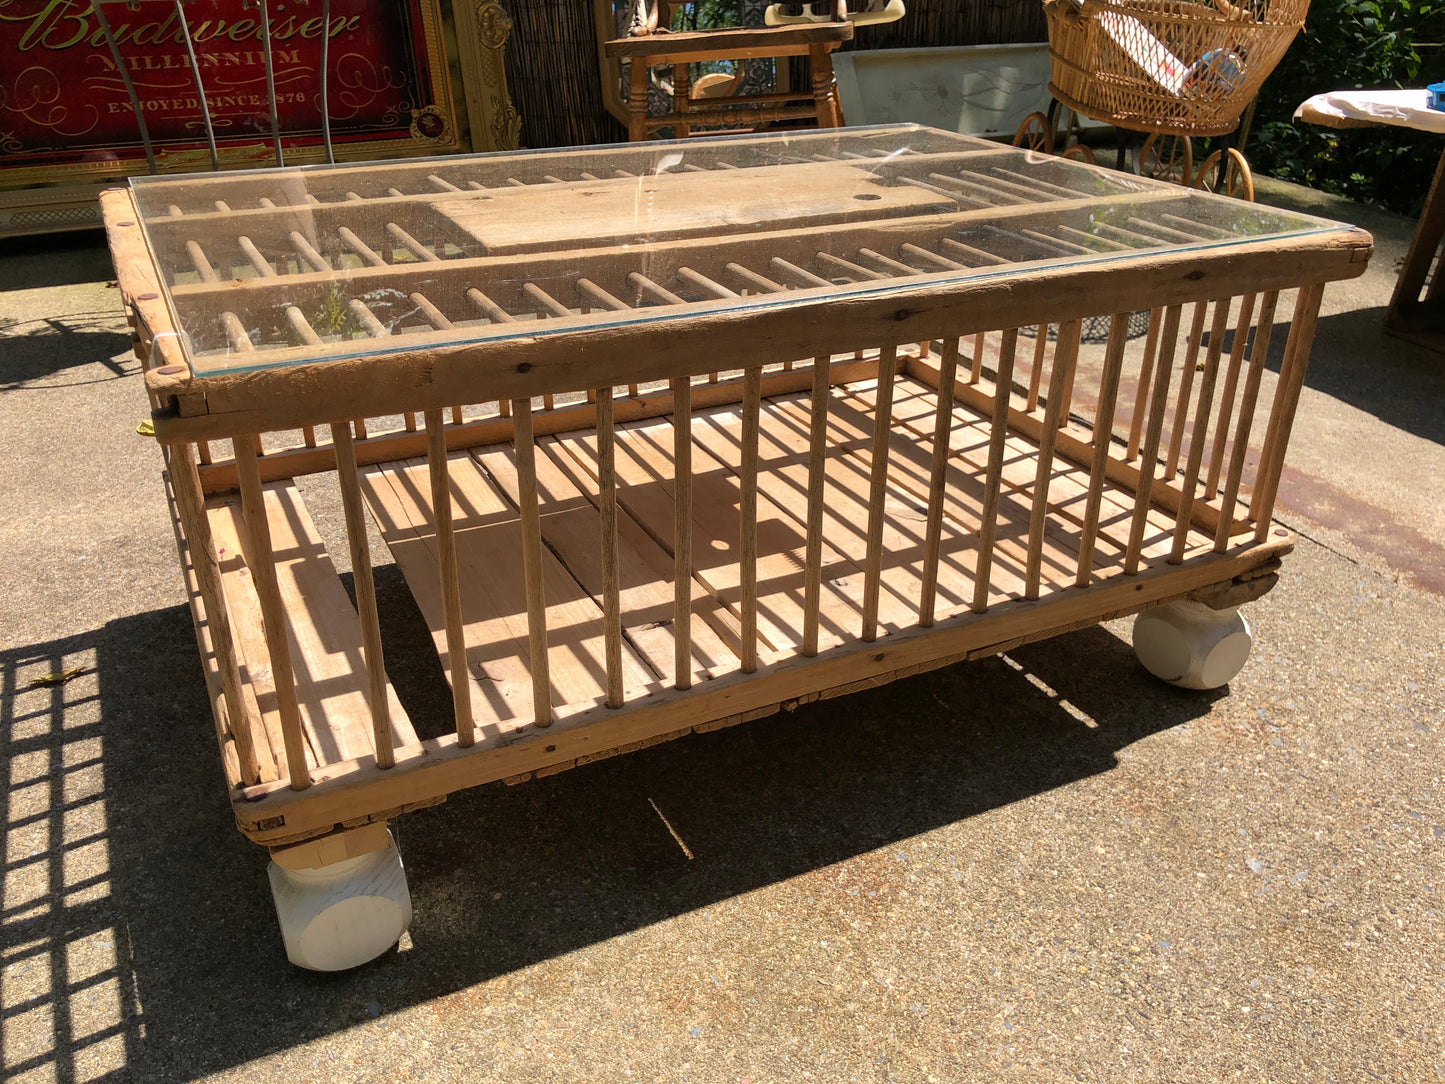 Chicken Crate Table